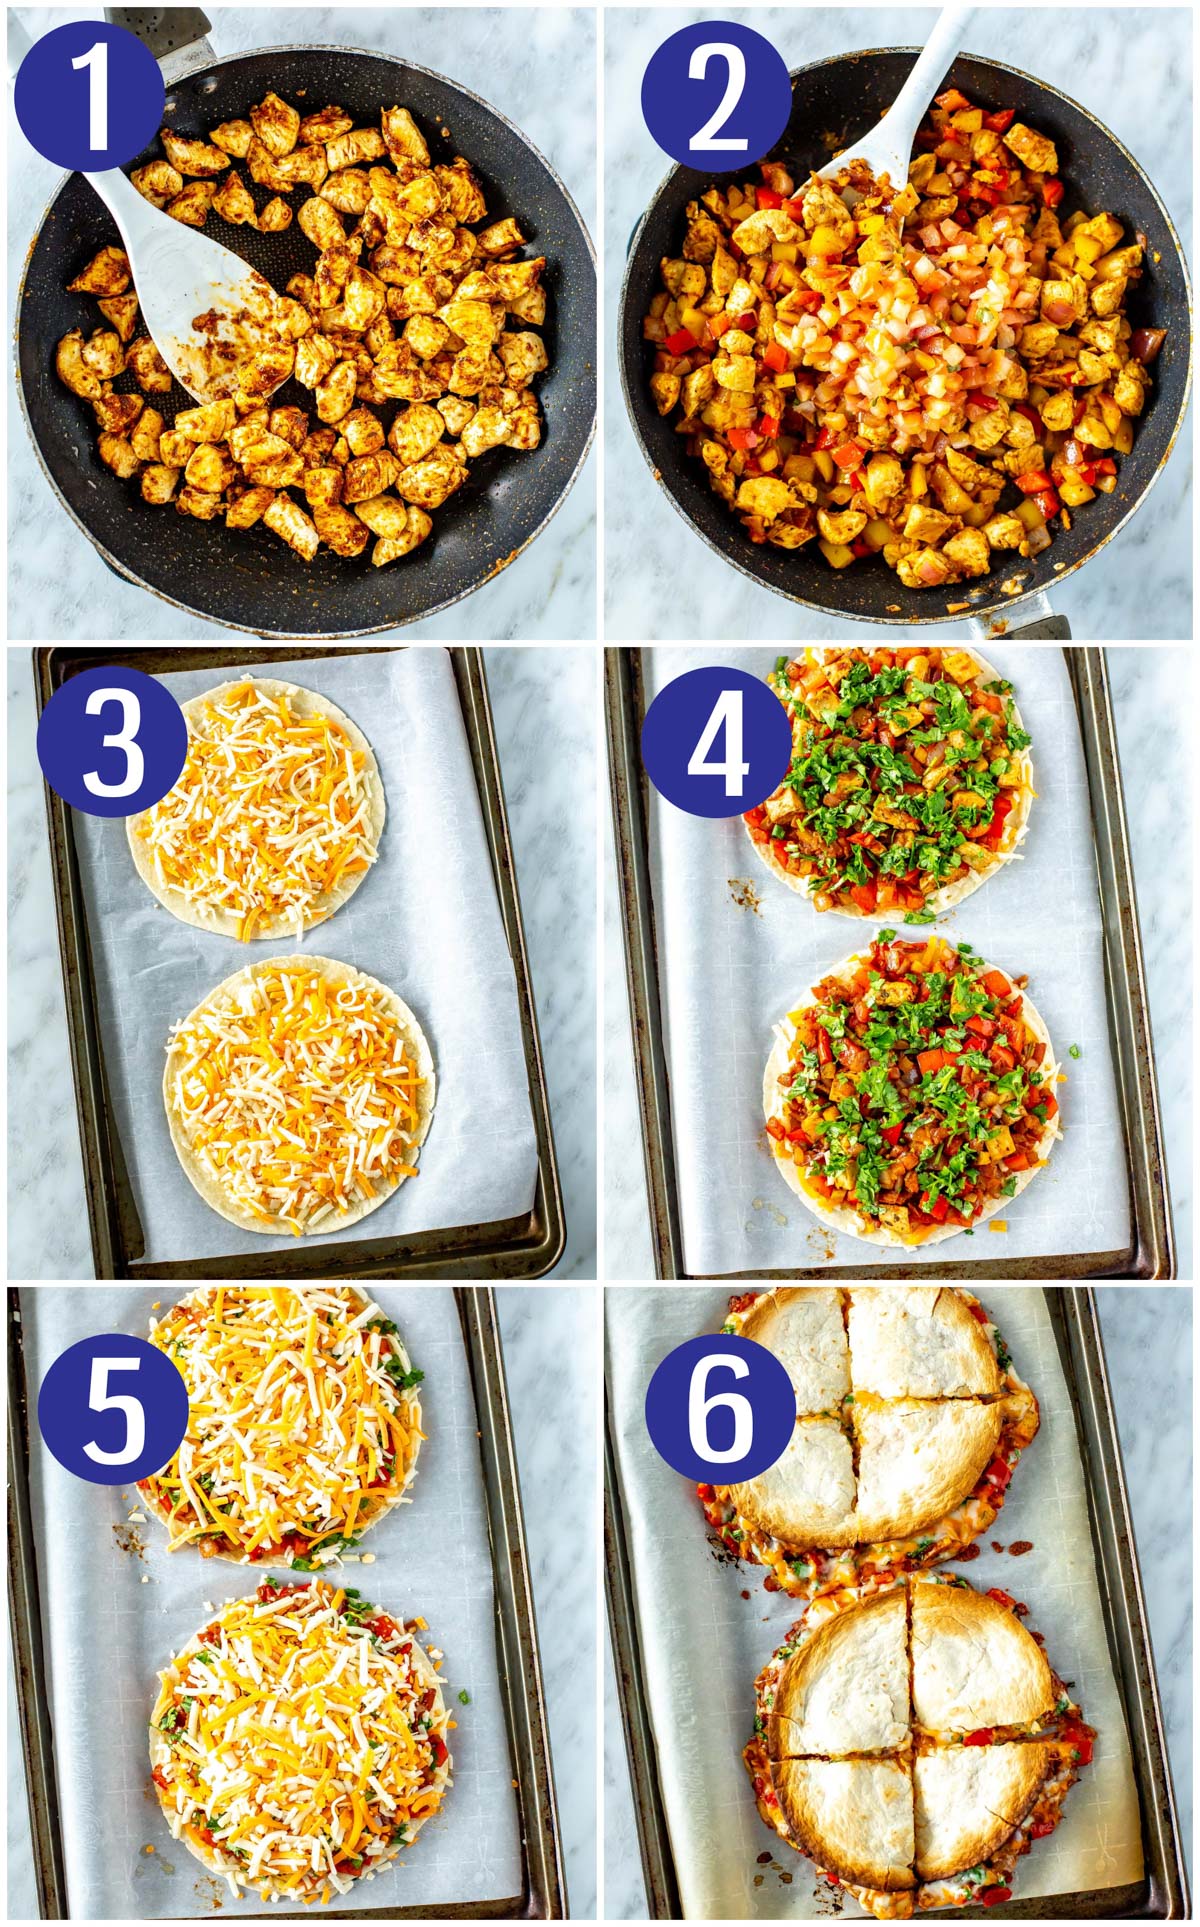 Step-by-step instructions collage for chicken quesadillas: cook chicken, add pico de gallo and peppers, put cheese on tortillas, add chicken to tortillas, add more cheese on top of chicken, bake quesadillas.